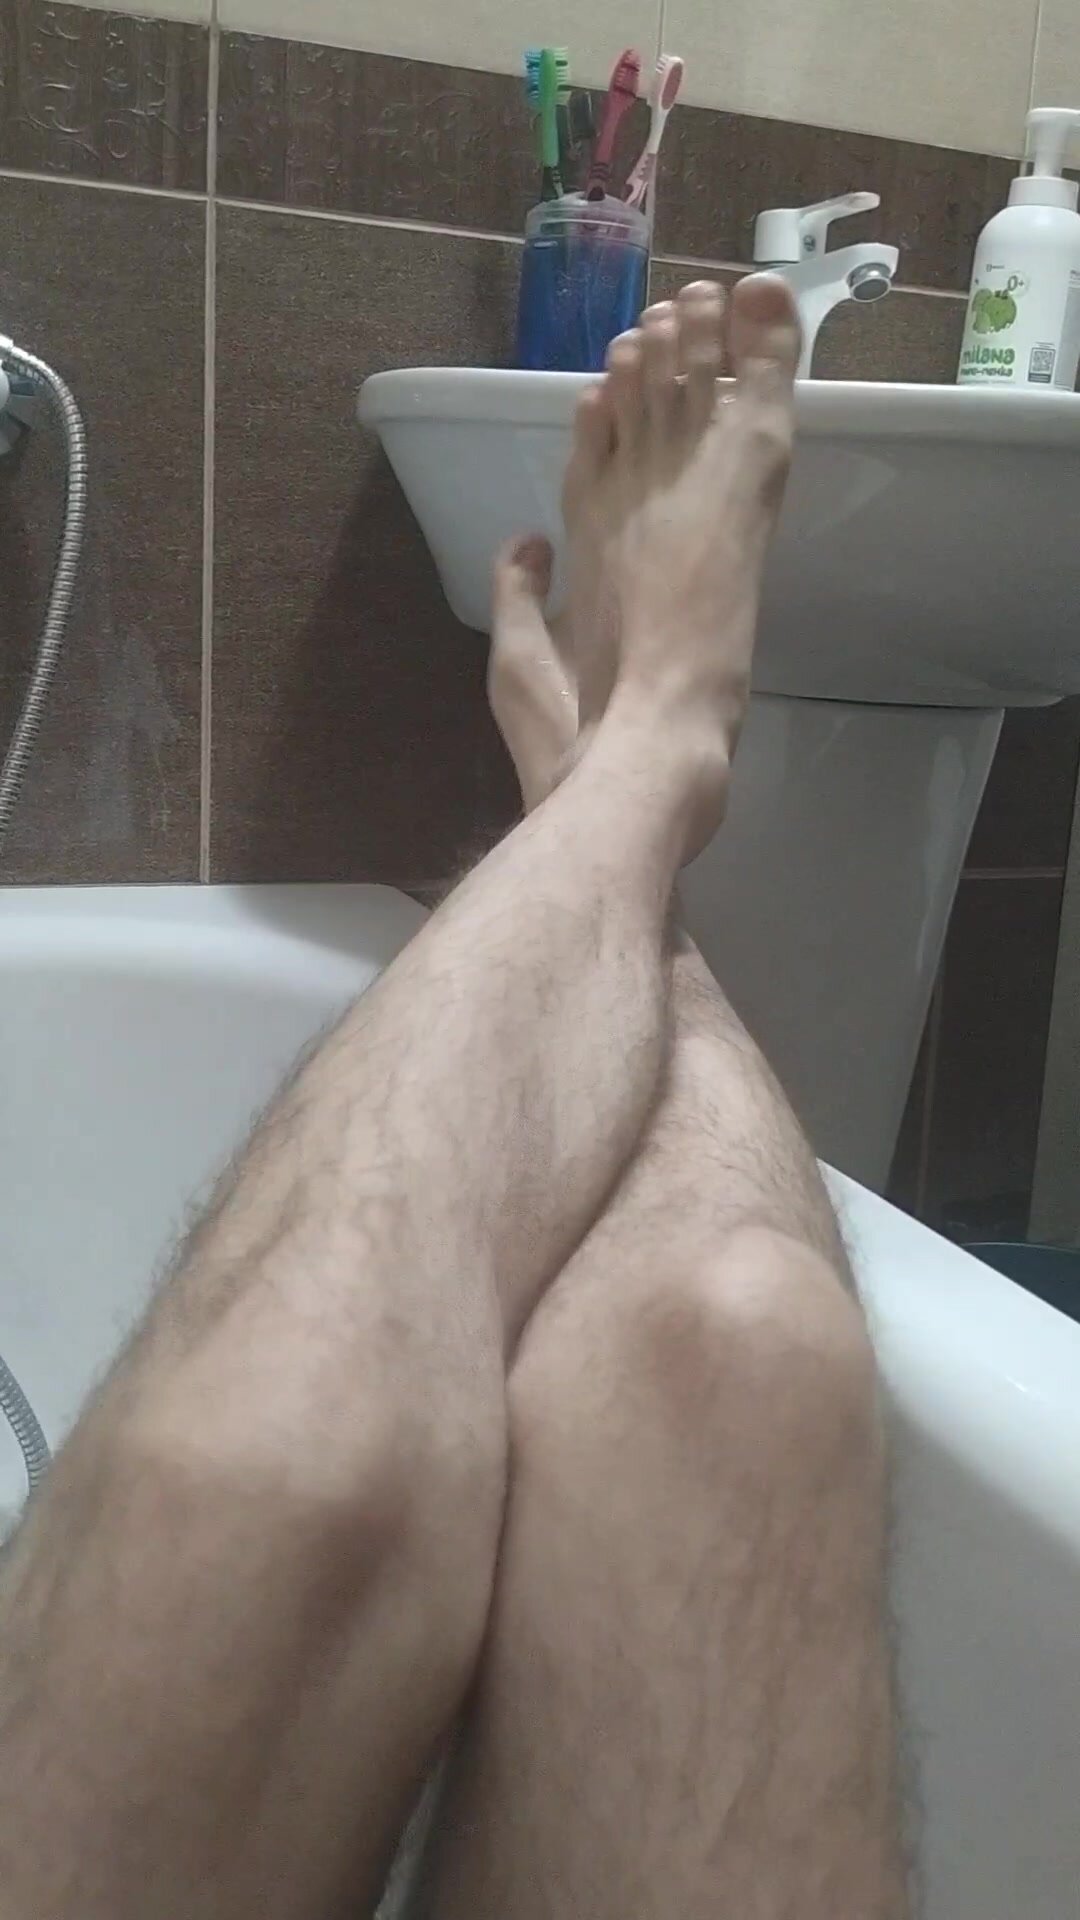 twink showing his feet in a bath